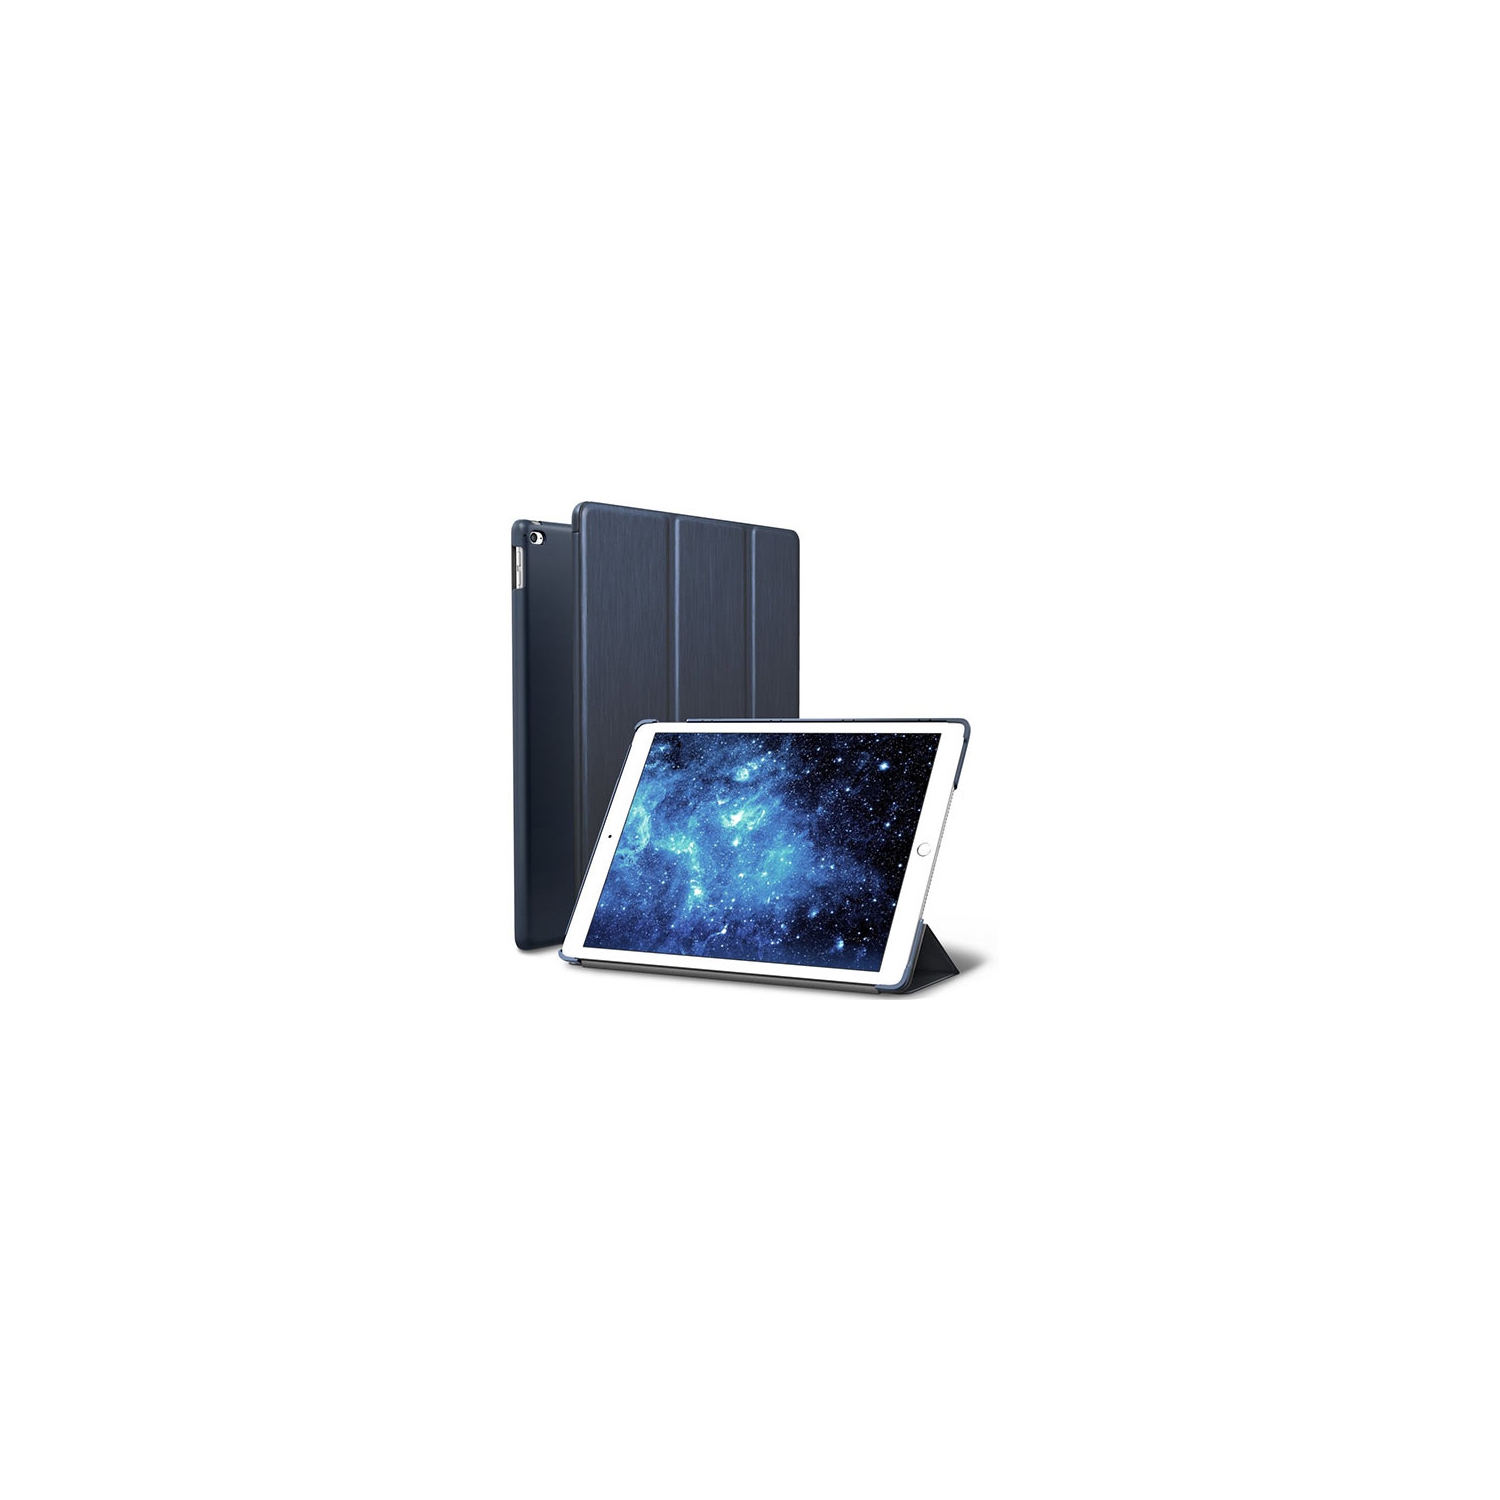 【CSmart】 Slim Magnetic Smart Cover Stand Case for iPad Air 2 2nd Gen. (9.7"), Navy